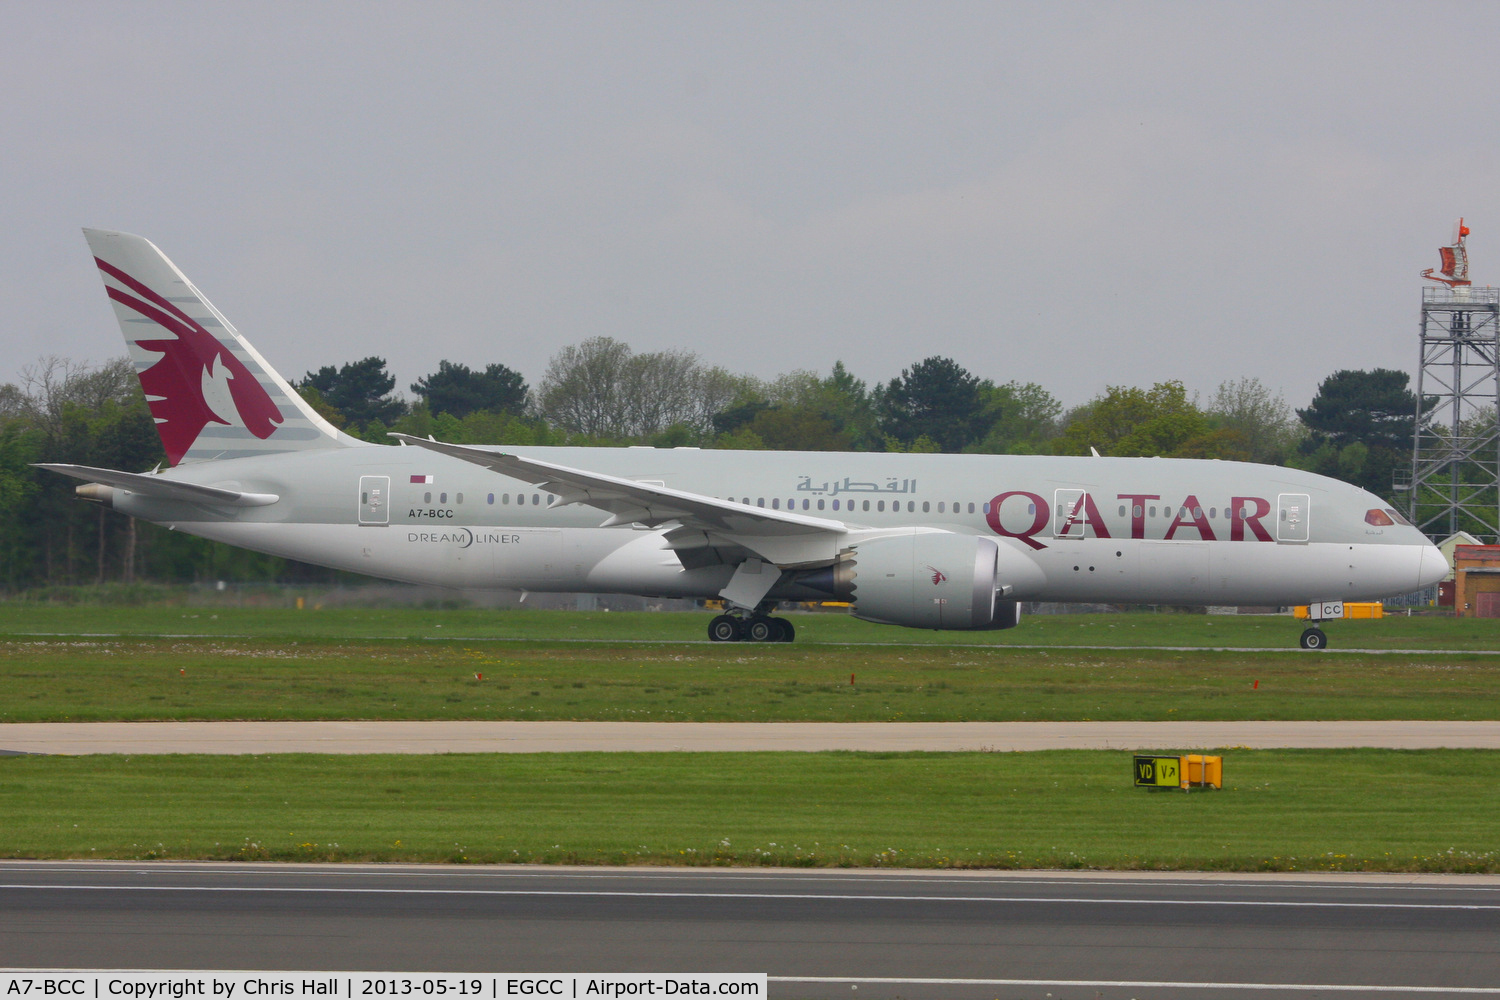 A7-BCC, 2012 Boeing 787-8 Dreamliner C/N 38321, Qatar Airways B787 making the 1st commercial flight of the type into Manchester Airport